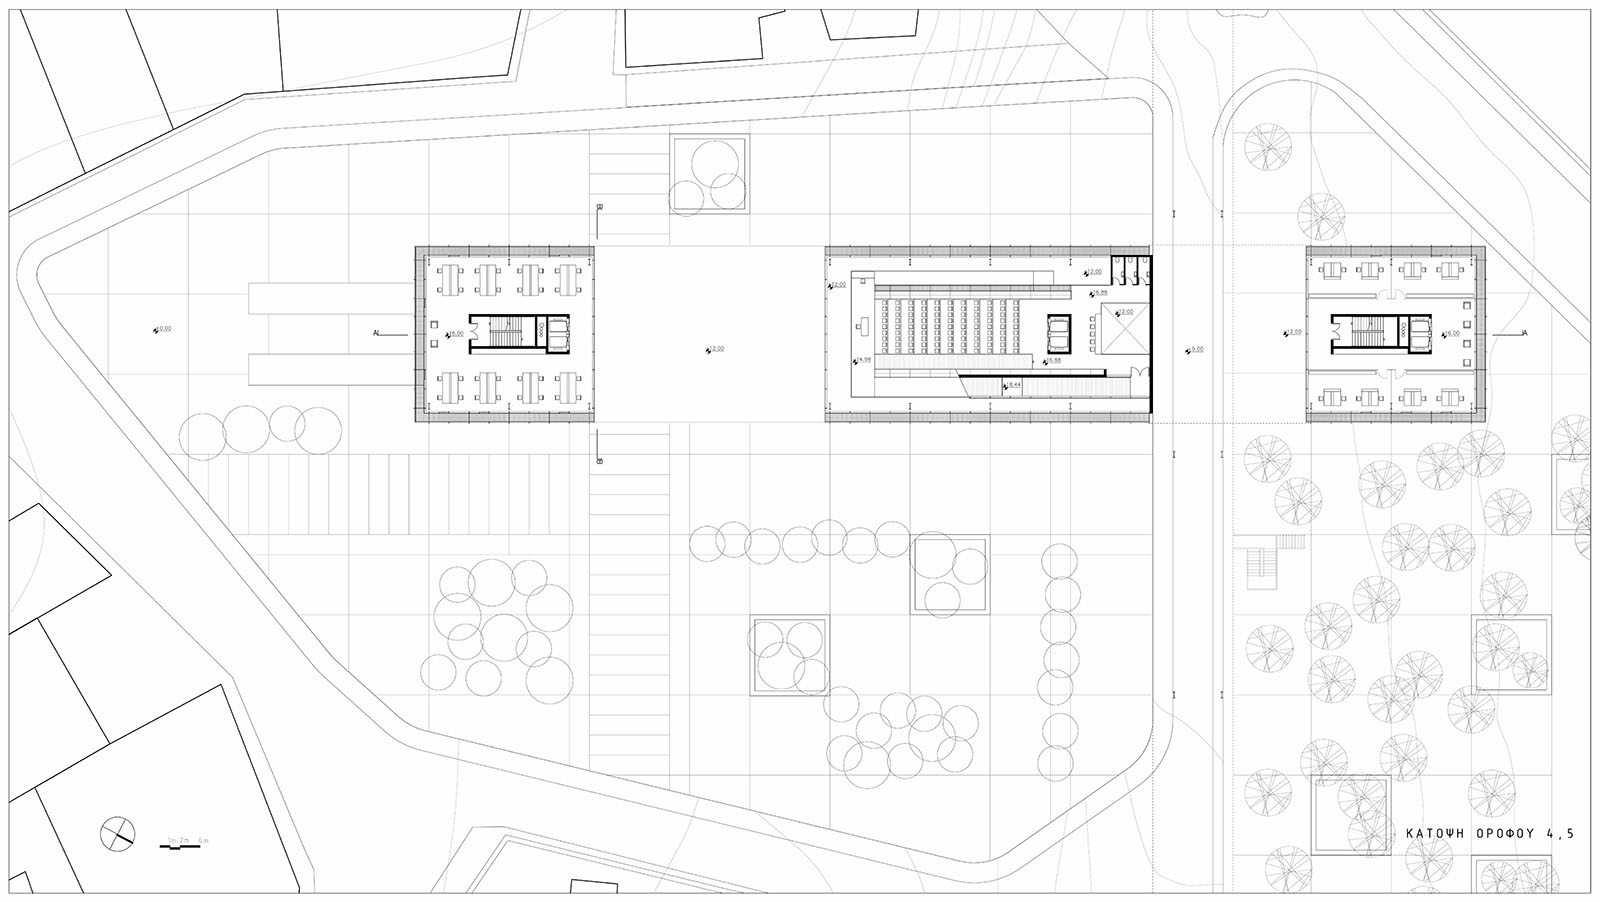 Archisearch The New City Hall of Ioannina | Diploma thesis by Athina Pappa, Stefanos Natsis